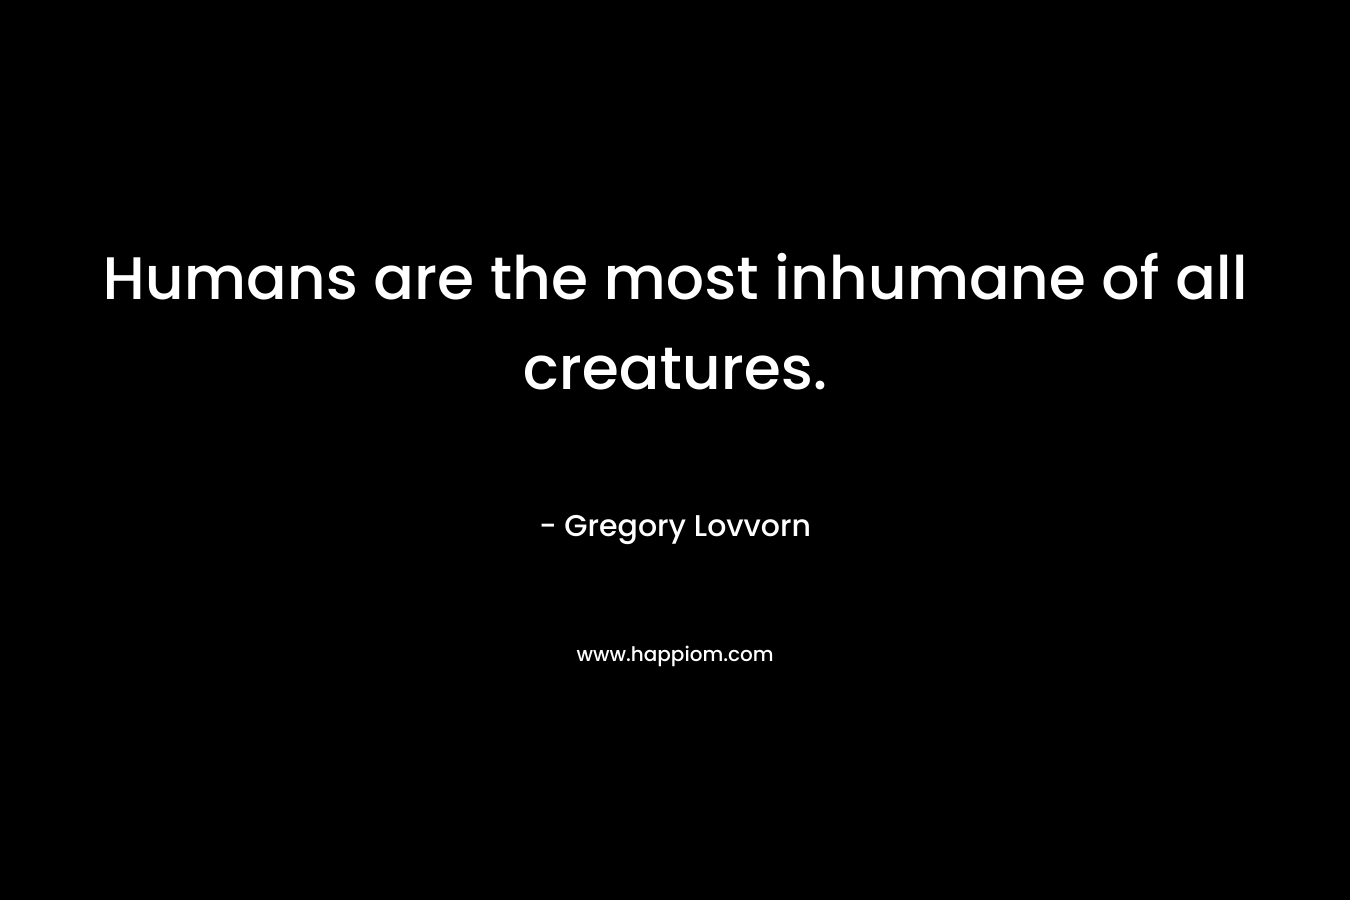 Humans are the most inhumane of all creatures. – Gregory Lovvorn